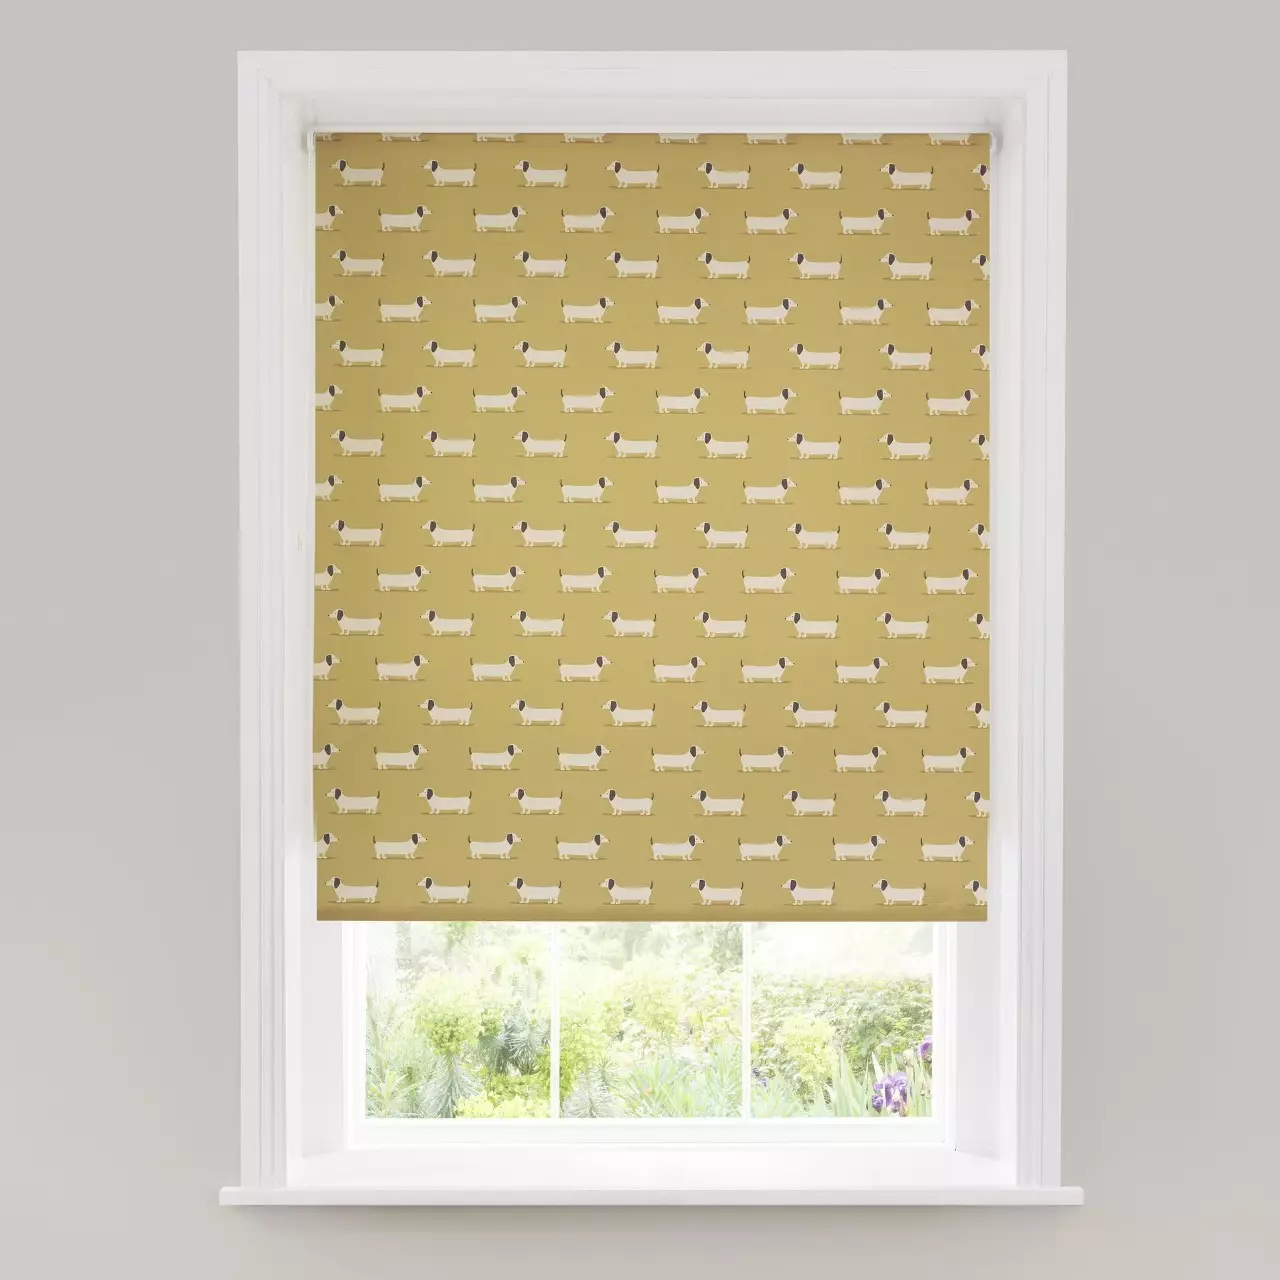 Blackout blinds from £16 (